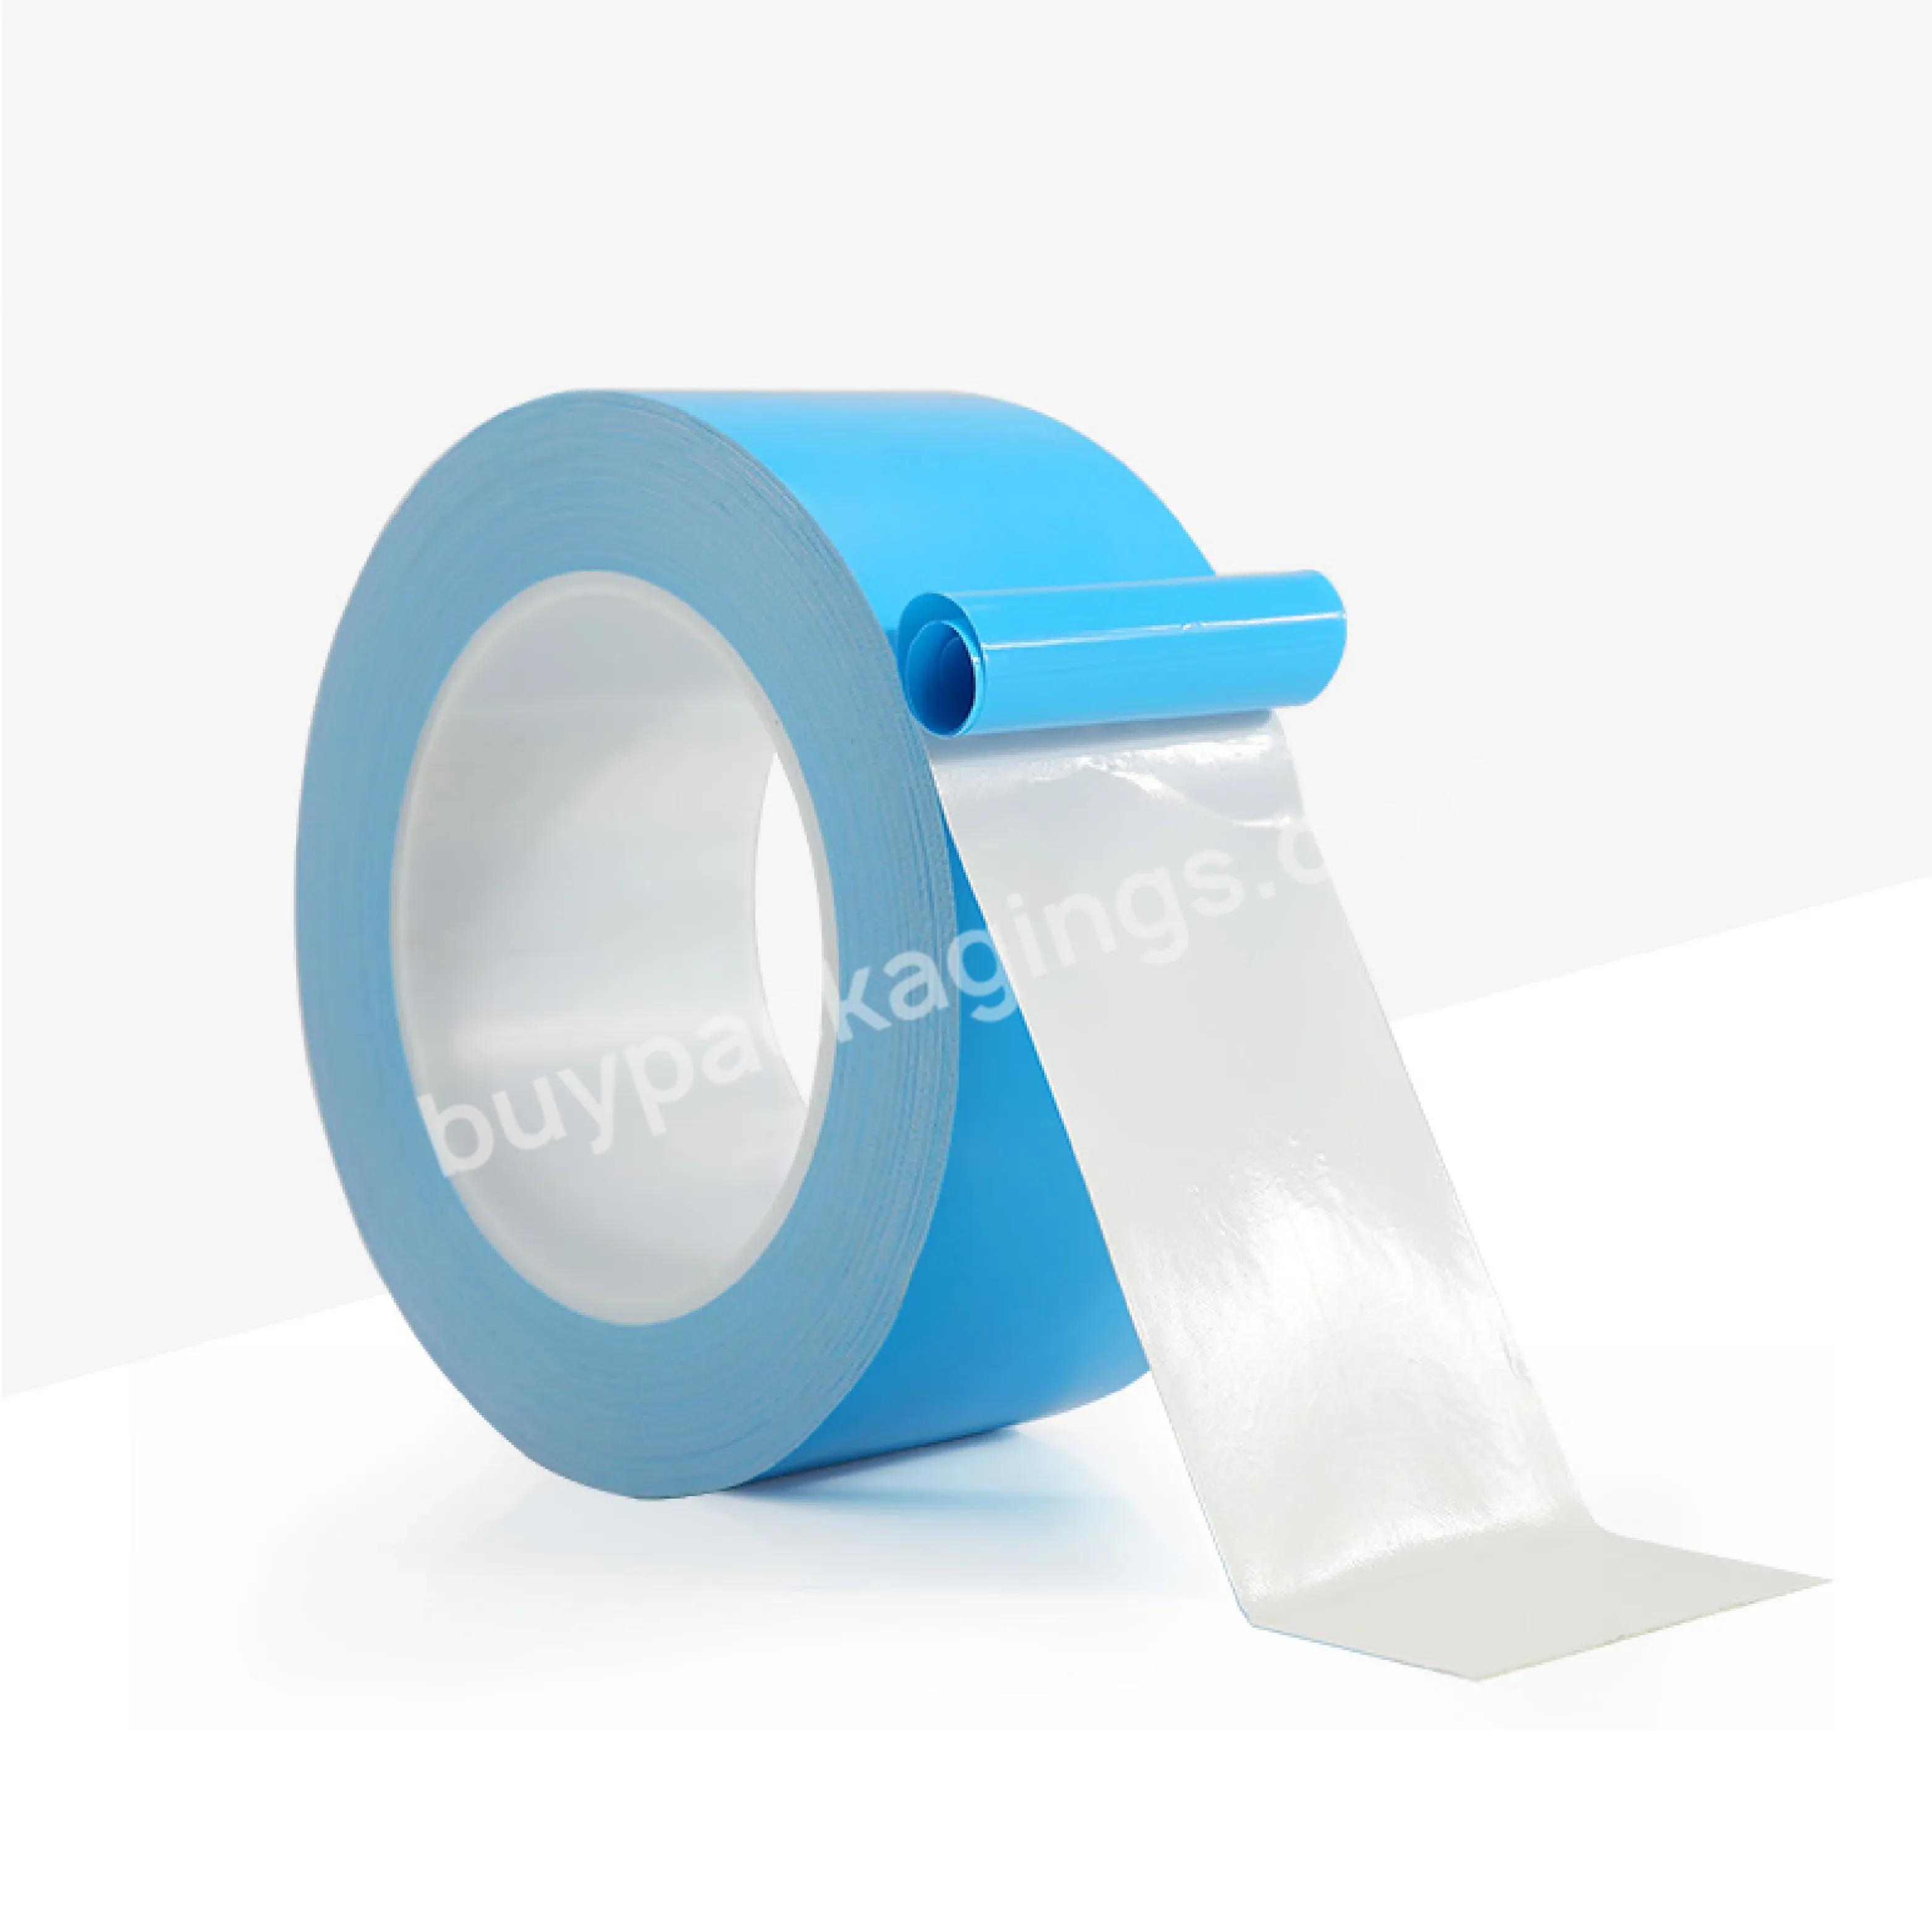 Qld Silicone Blue Adhesive Thermal Conductive Tape With Release Film For Led Light - Buy Blue Film Thermal Conductive Tape,Thermal Transfer Tape,Thermal Insulation Tape.